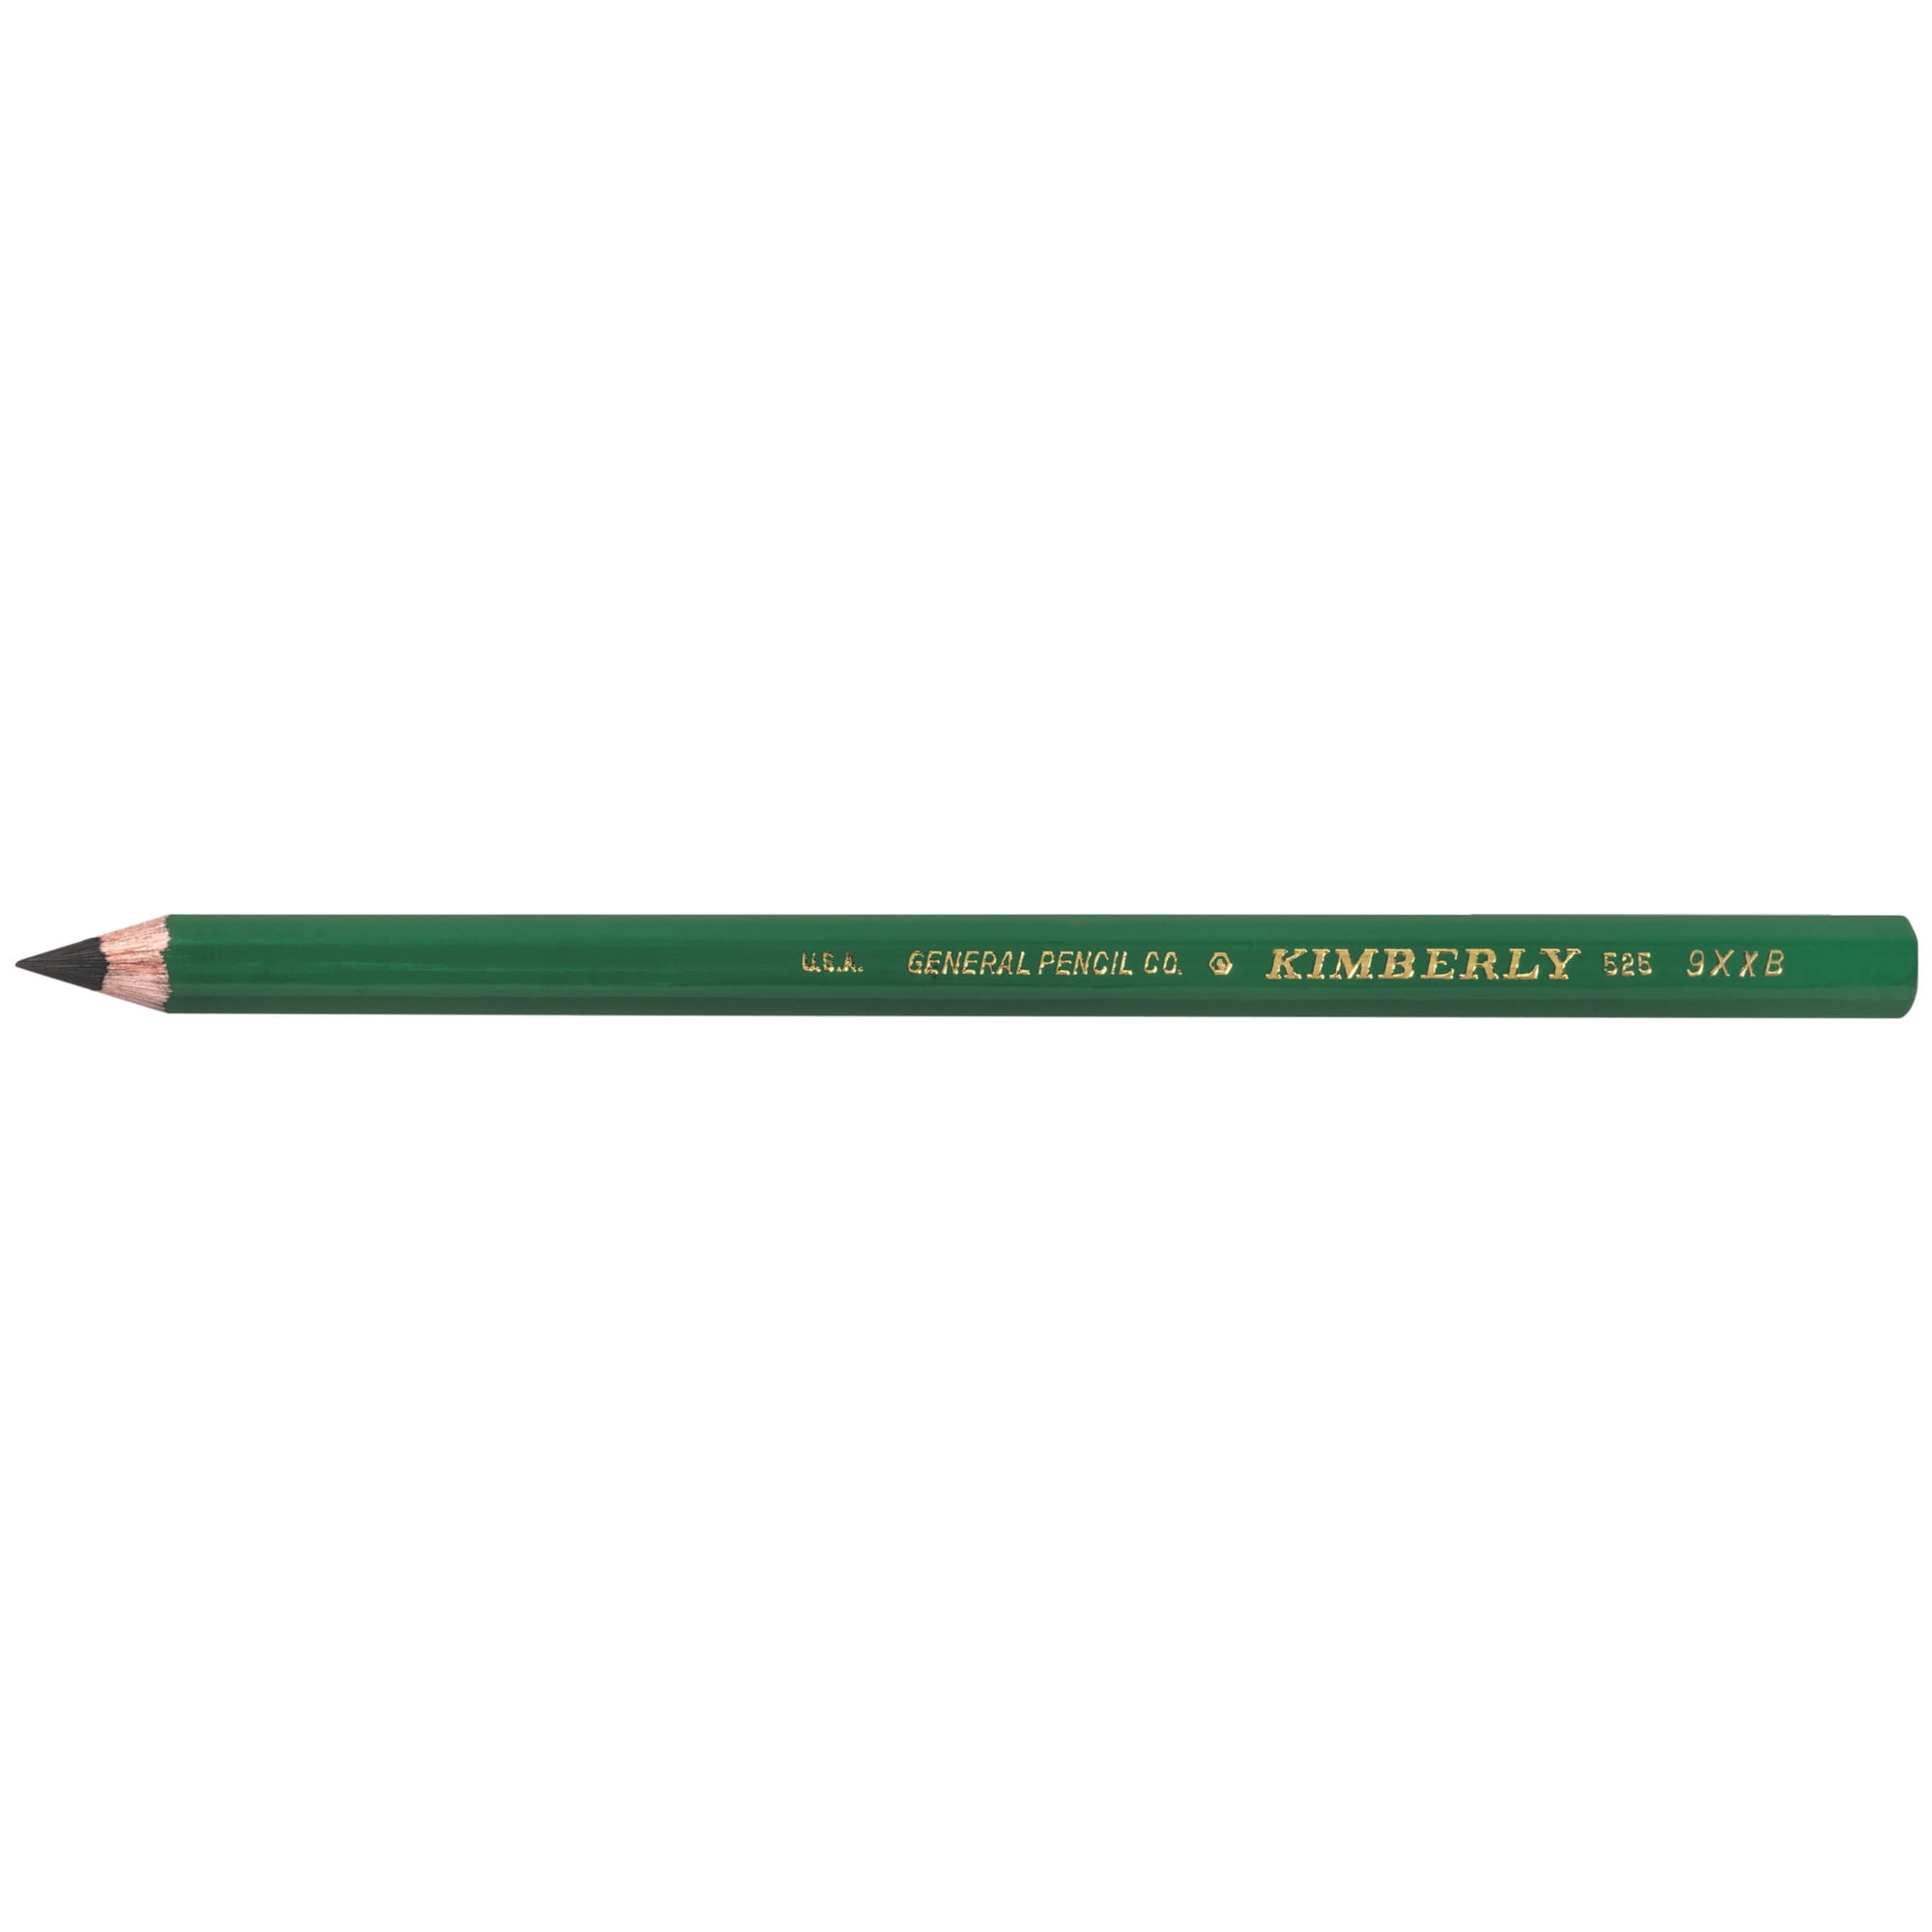 General's Solid Graphite Drawing Pencils